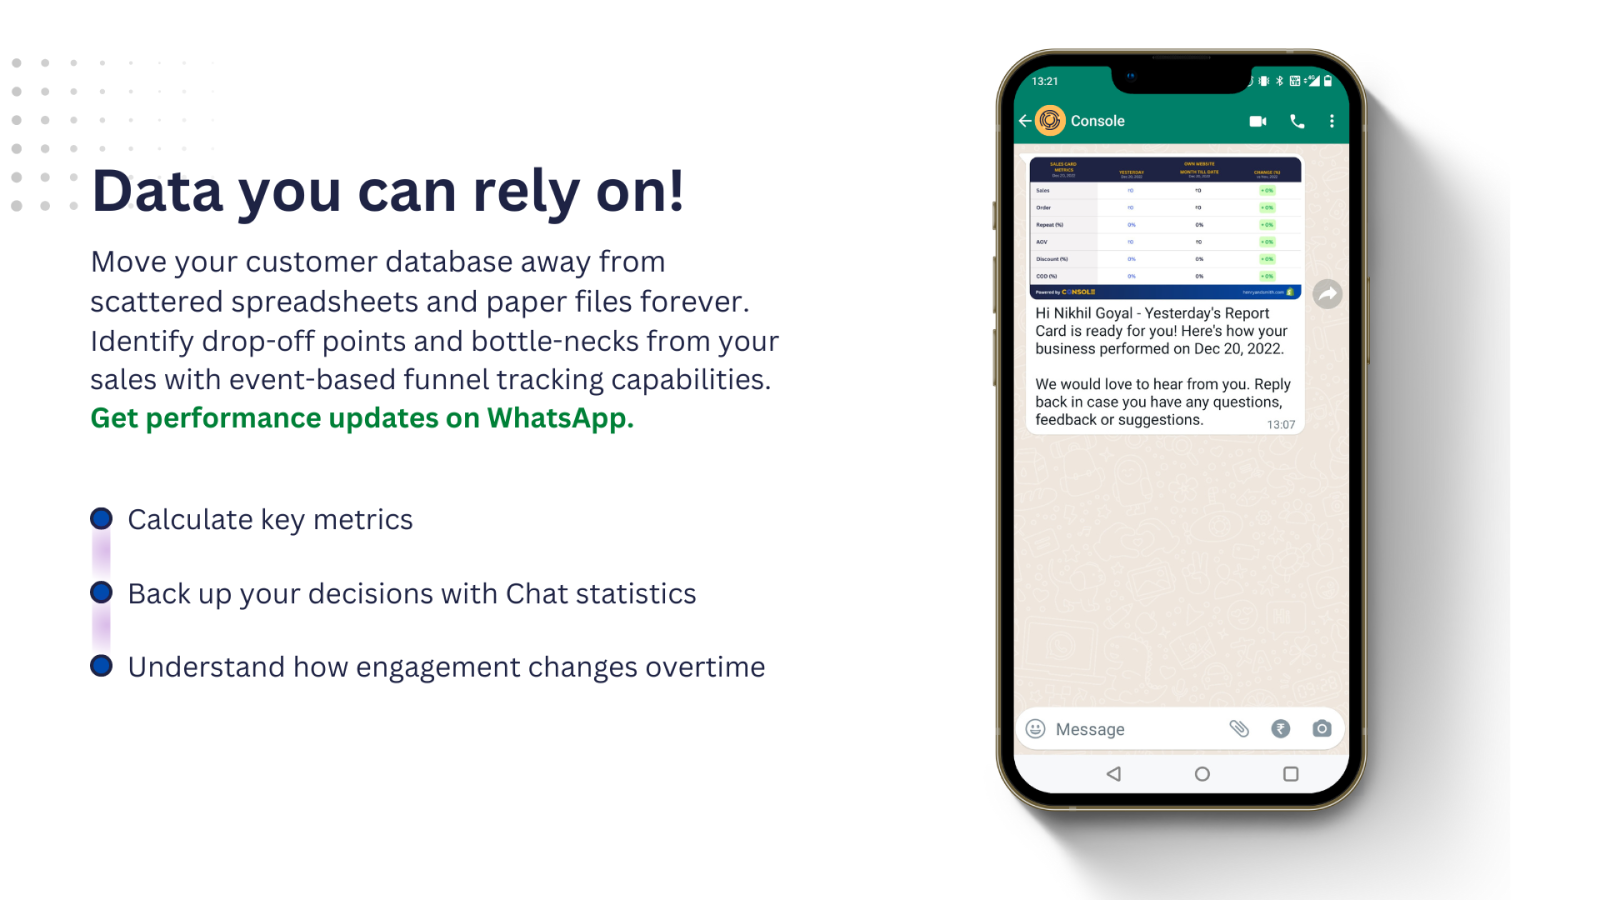 Daily business performance reports directly on your WhatsApp